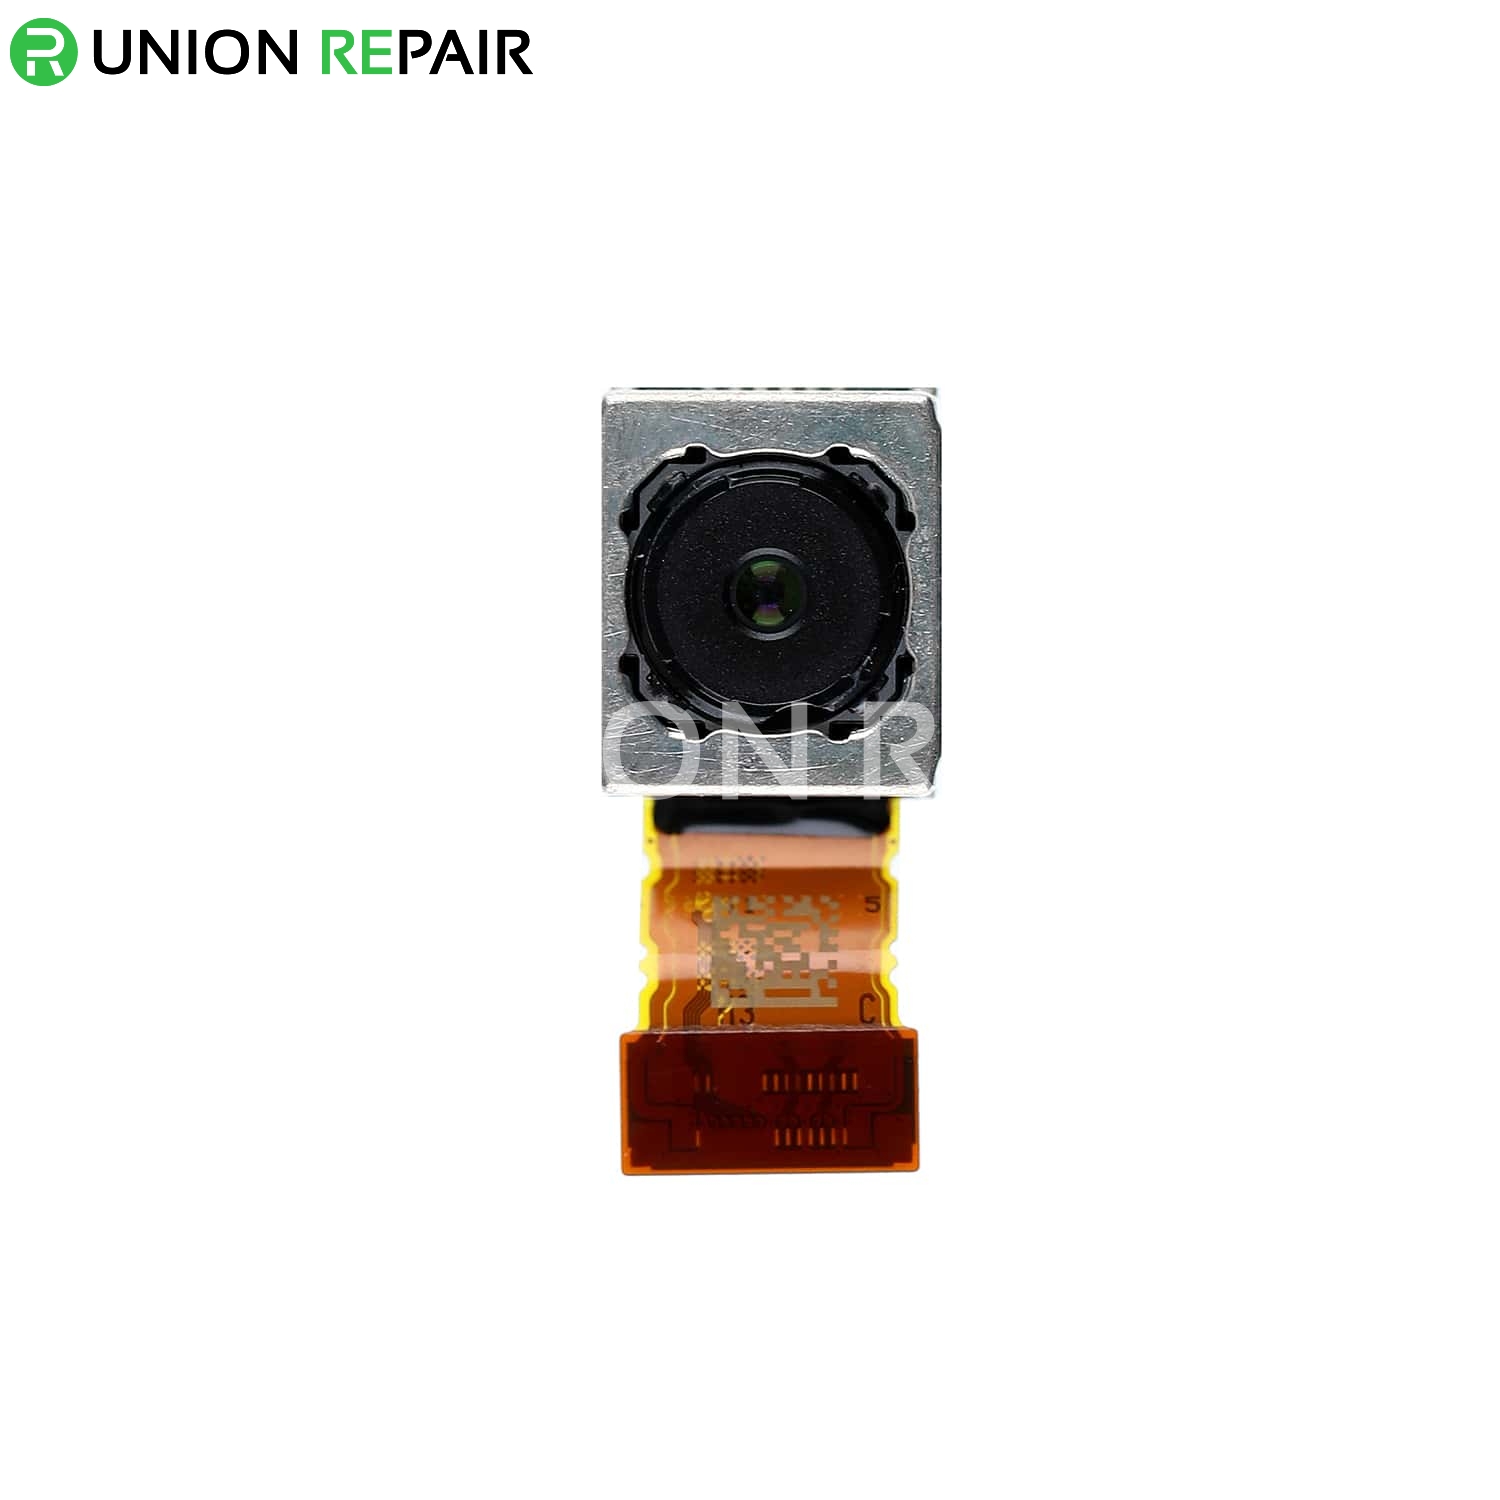 Hen Moedig aan vis Replacement for Sony Xperia X Performance Rear Camera